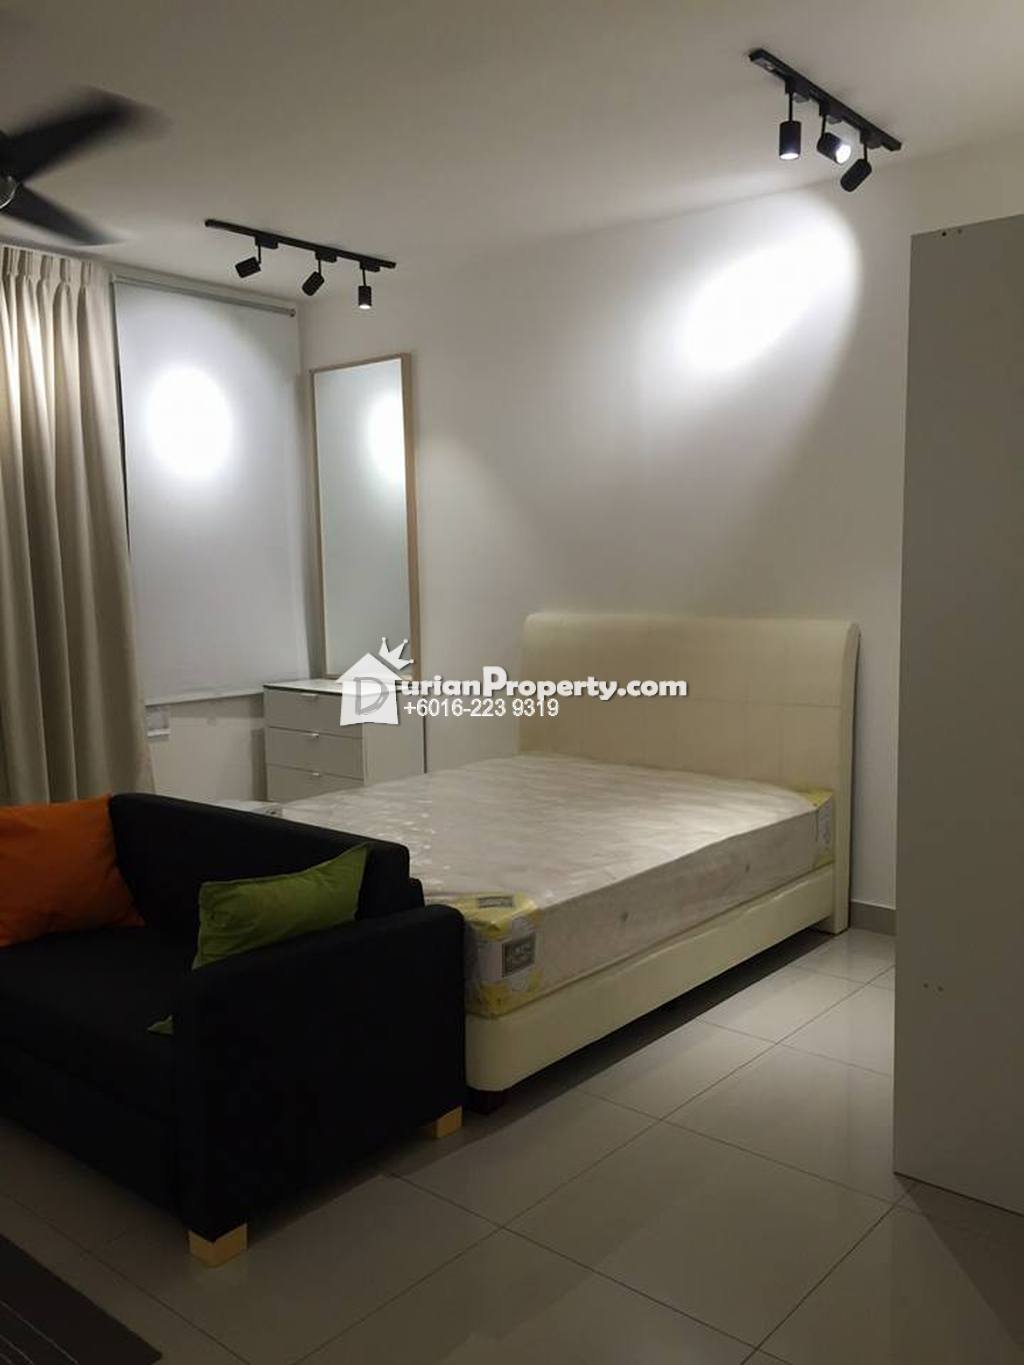 SOFO For Sale at Trefoil, Setia Alam for RM 322,000 by 